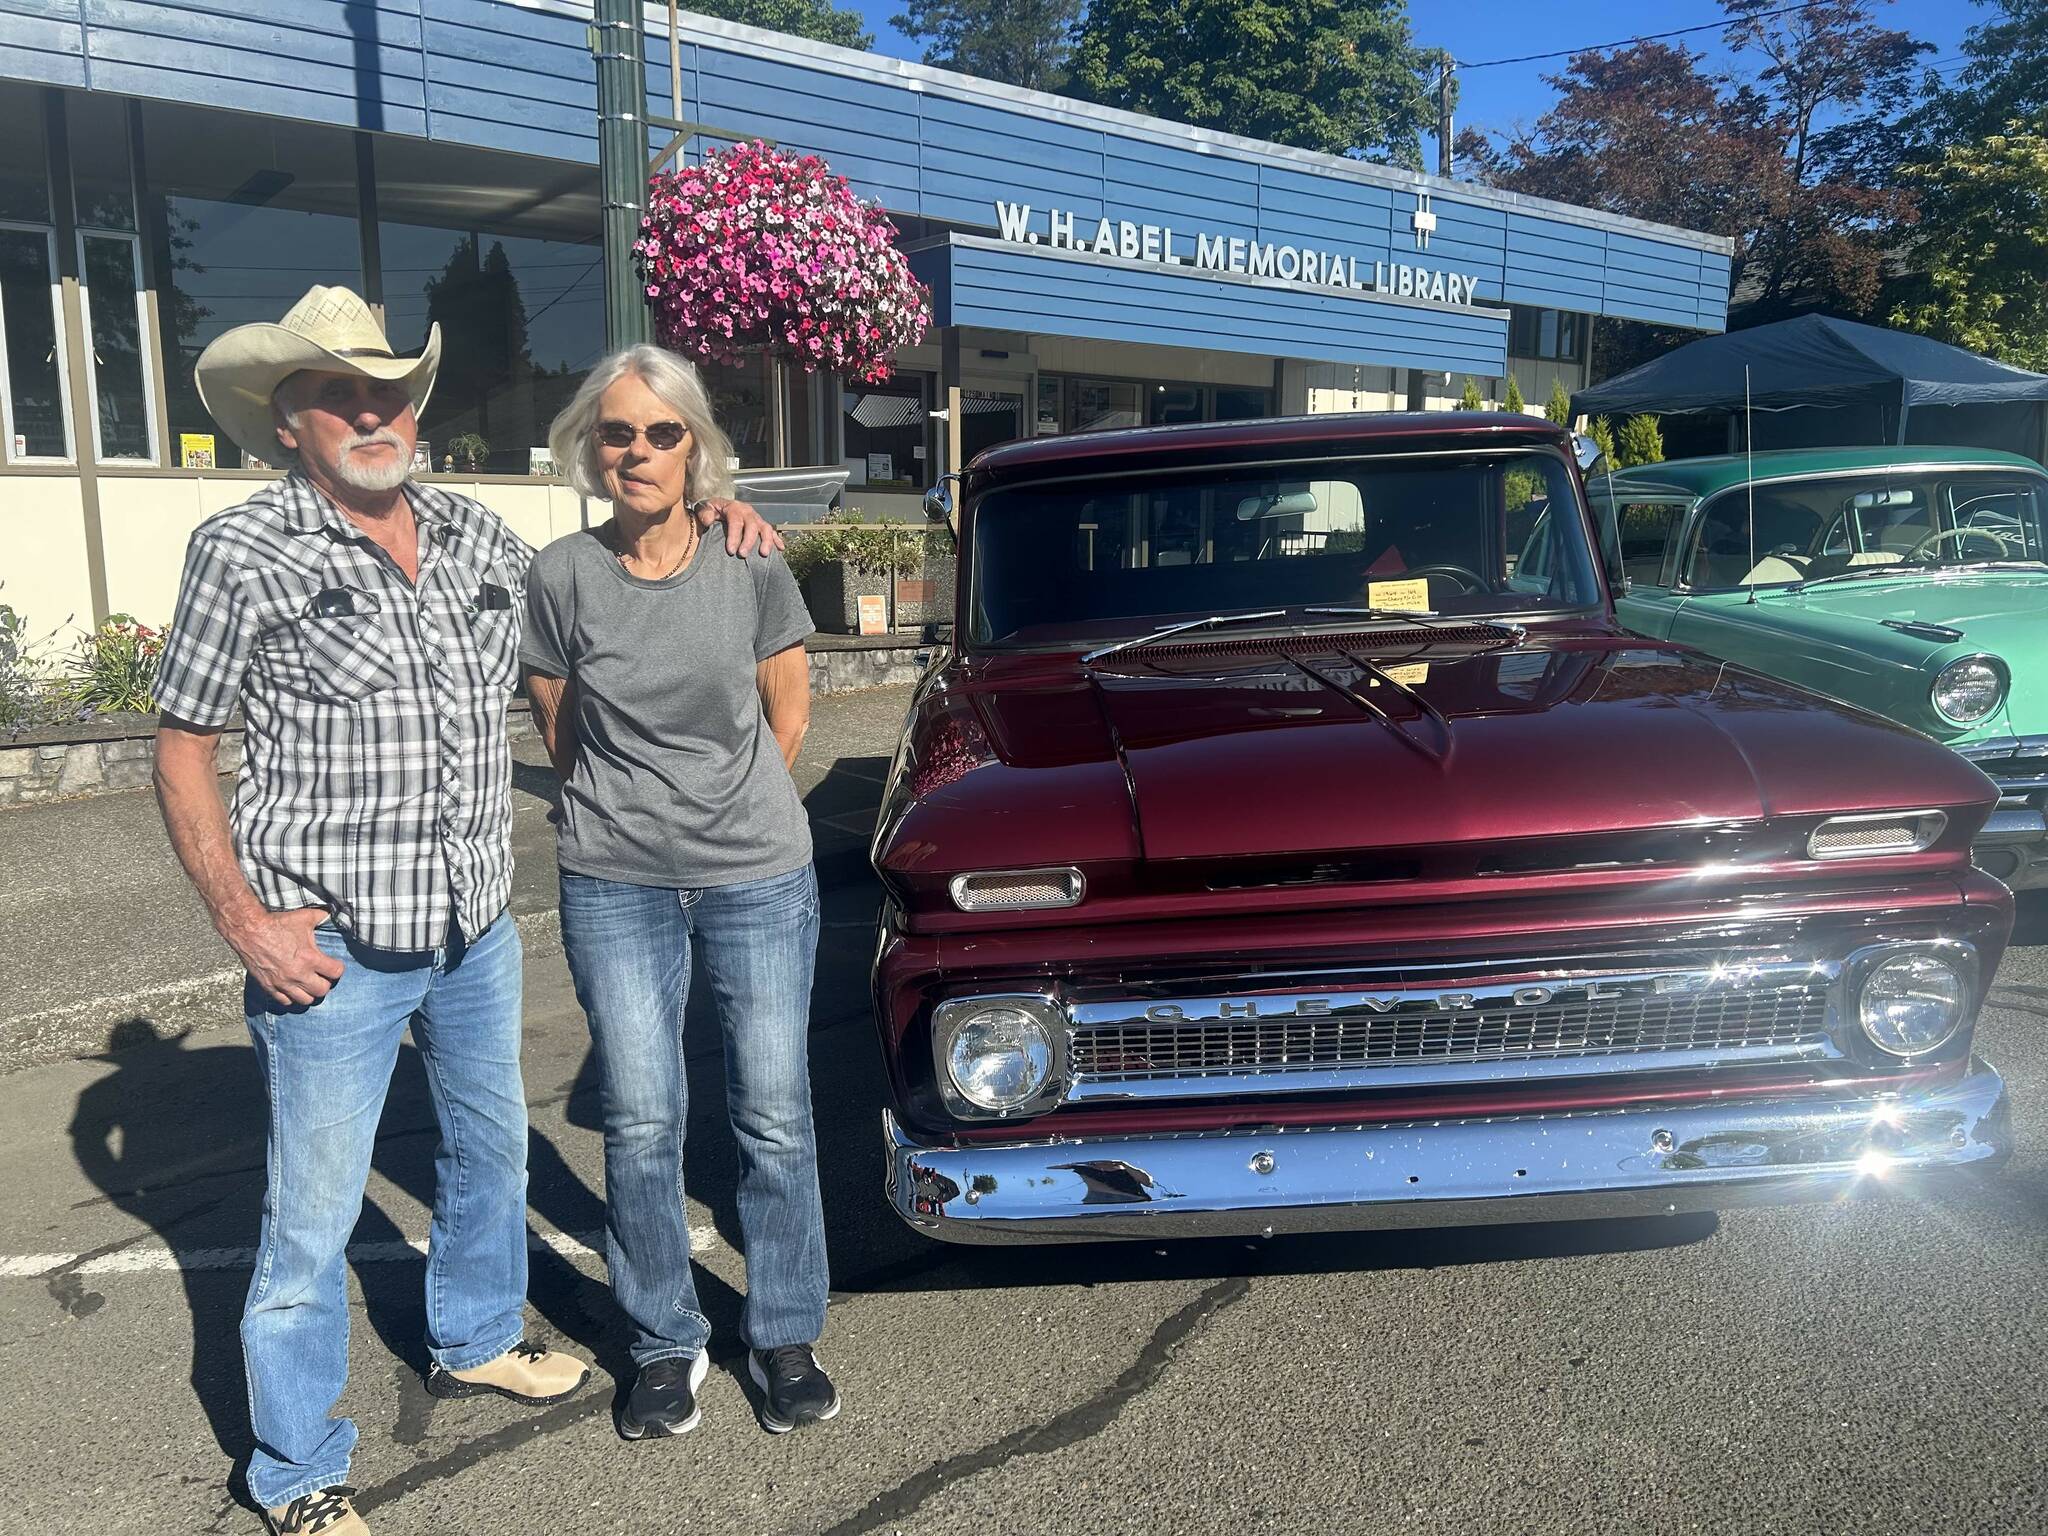 Donna Murphy and Mike Neal pose with their 1964 Chevy truck during the Historic Montesano Car Show on July 15. (Lillian Saeger / The Daily World)